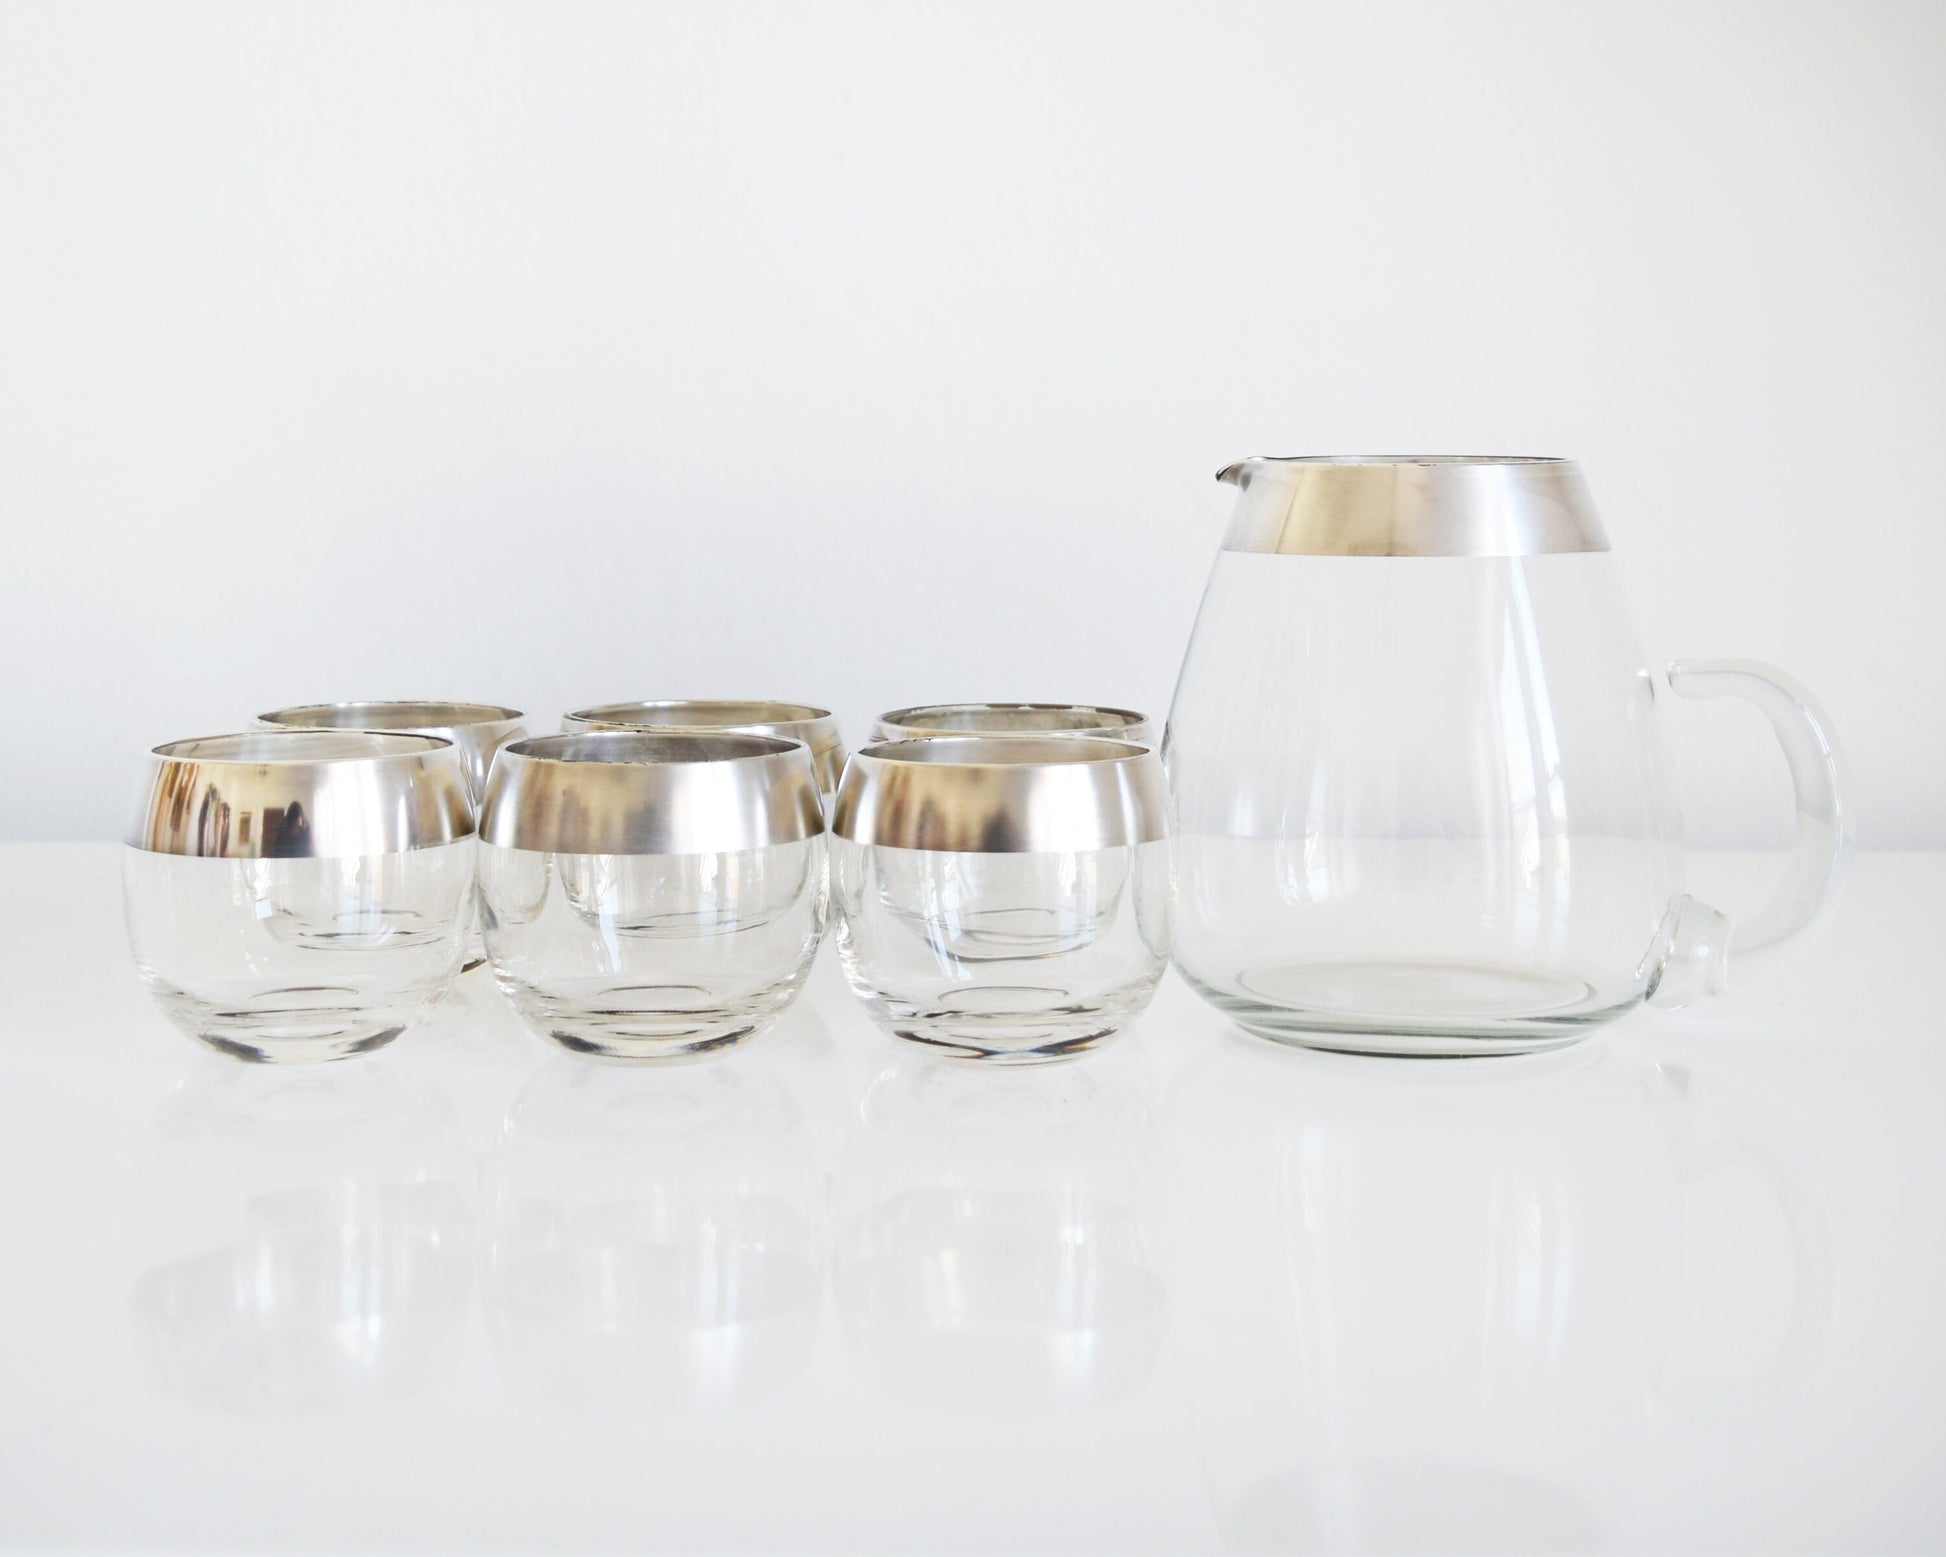 A vintage Dorothy Thorpe cocktail set that has a set of six silver rimmed rounded roly poly glasses with a matching silver rim pitcher with handle.